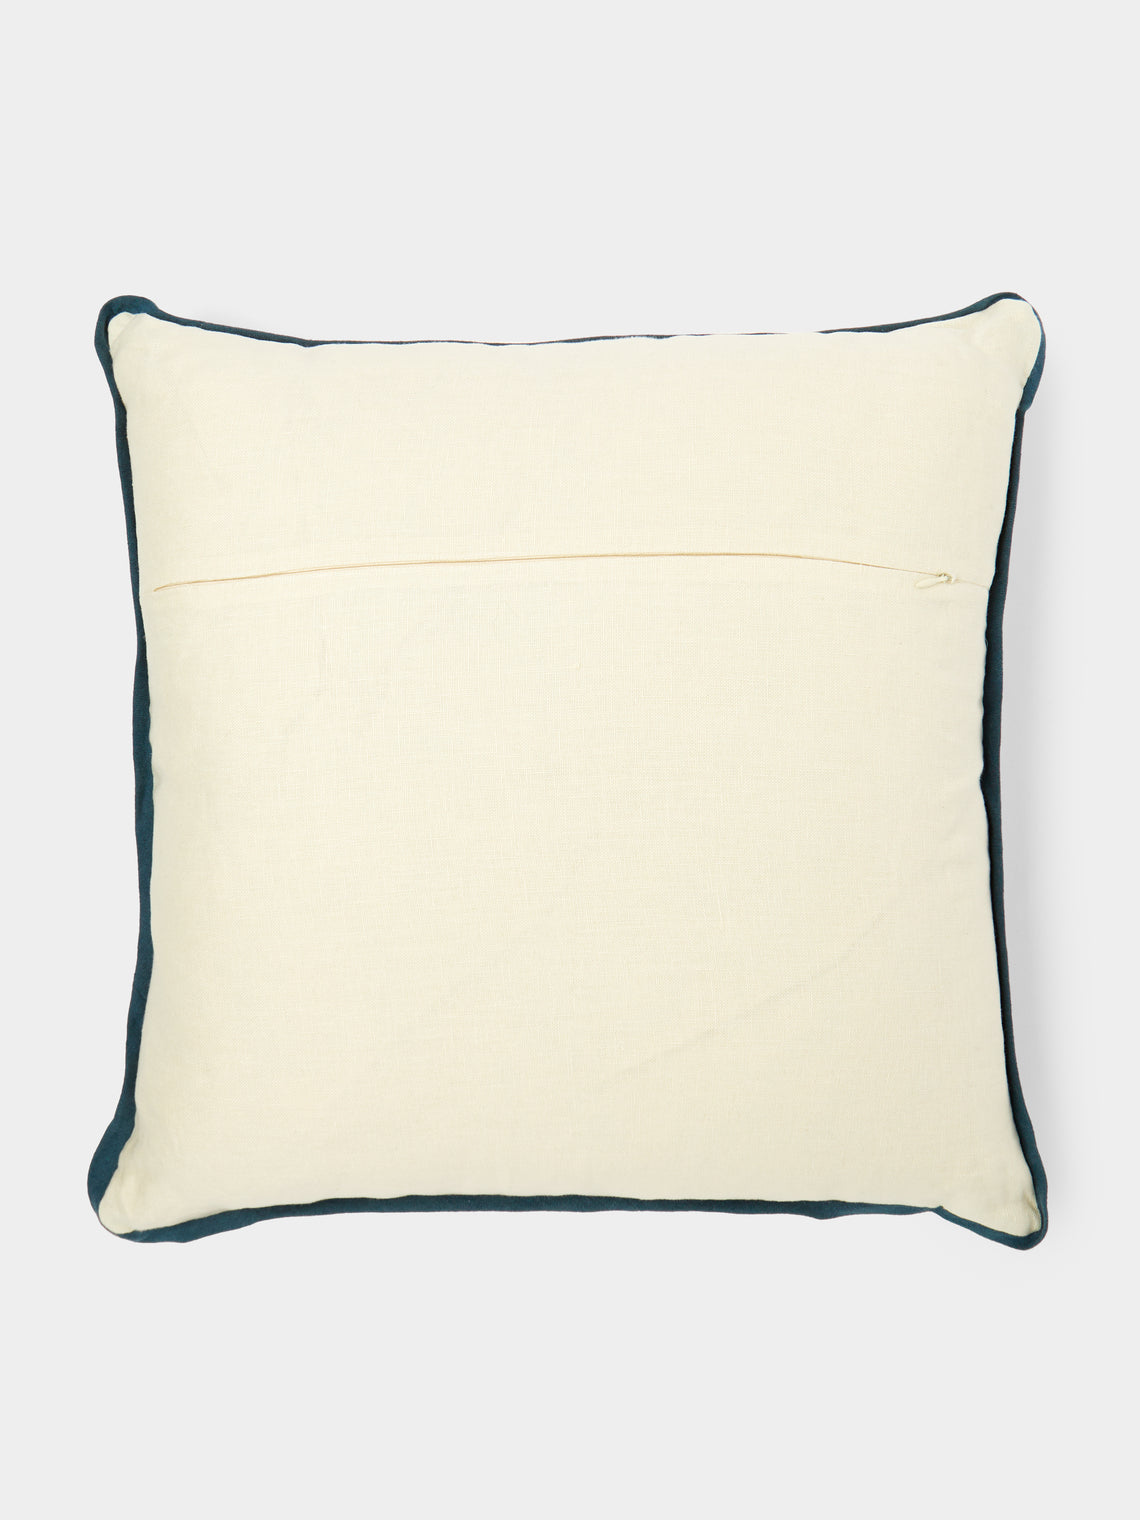 Rosemary Milner - Seaweed Hand-Embroidered Cotton Cushion -  - ABASK